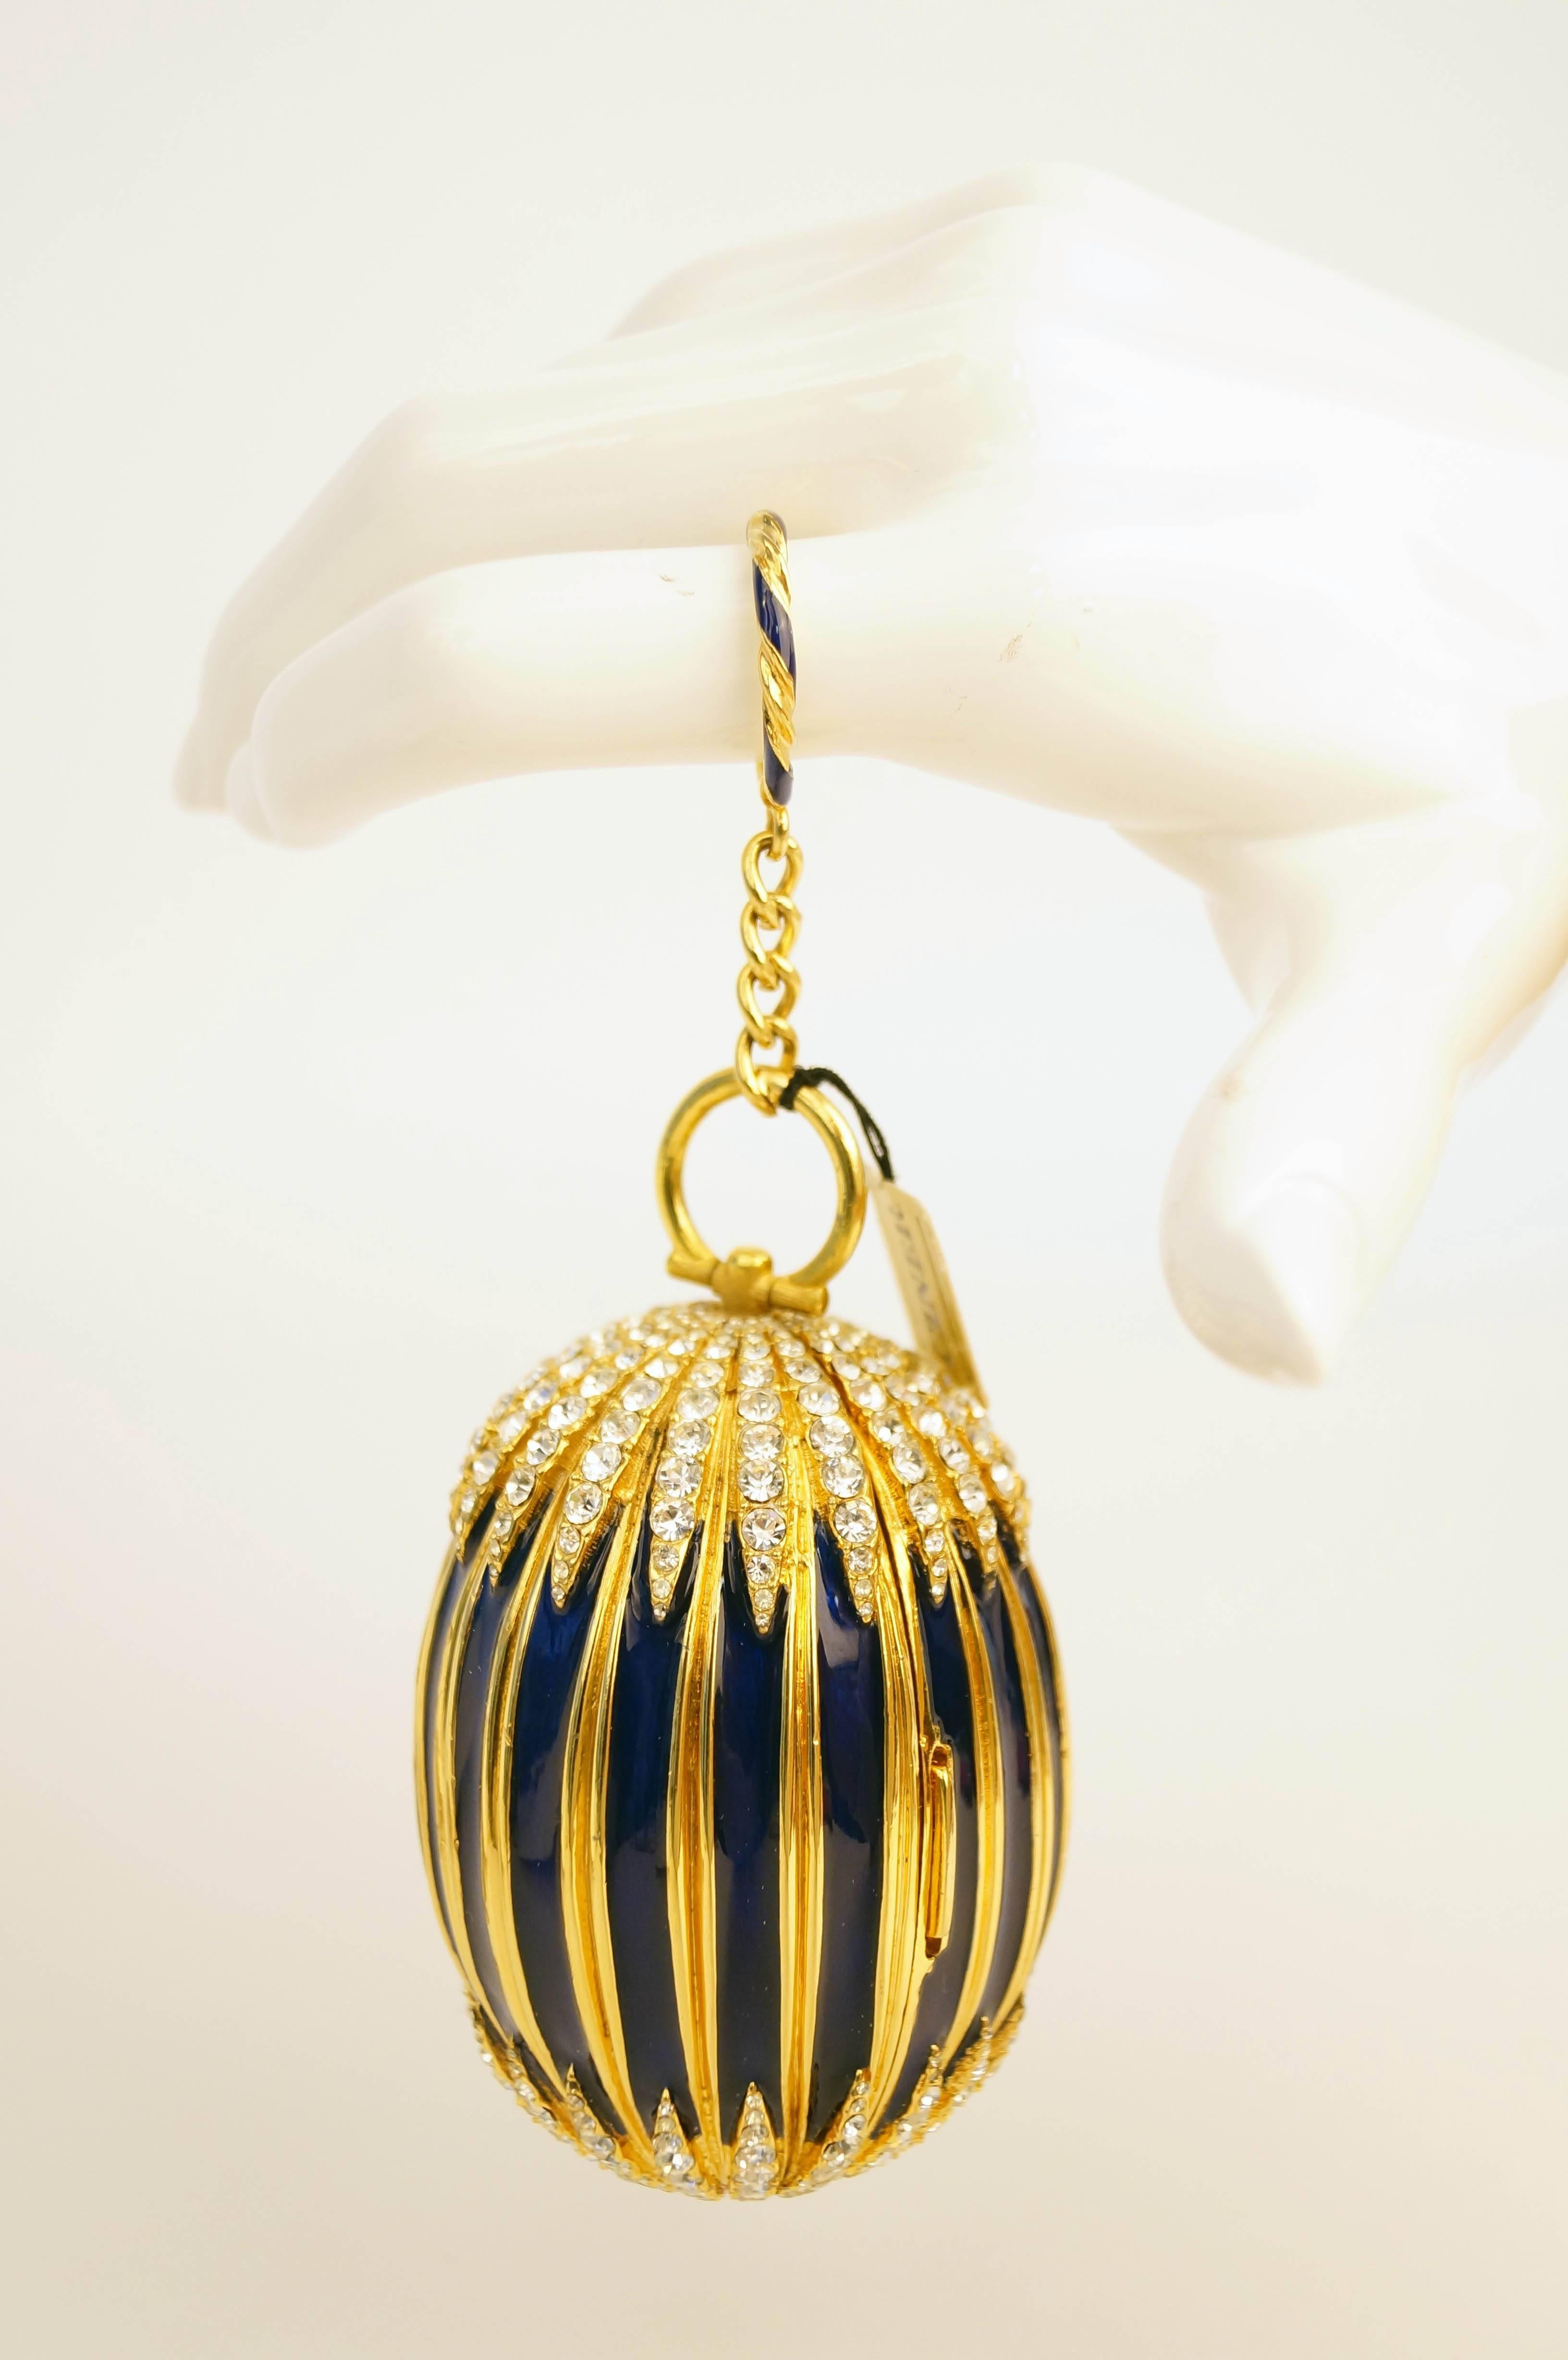 Perfect Timing!  In honor of its 125th annversary, Ciner has just released an Egg Minaudiere to celebrate it as one of Ciner's most coveted and hard to find designs.  We are offering an original. 
 
In addition, this gorgeous minaudiere was owned by